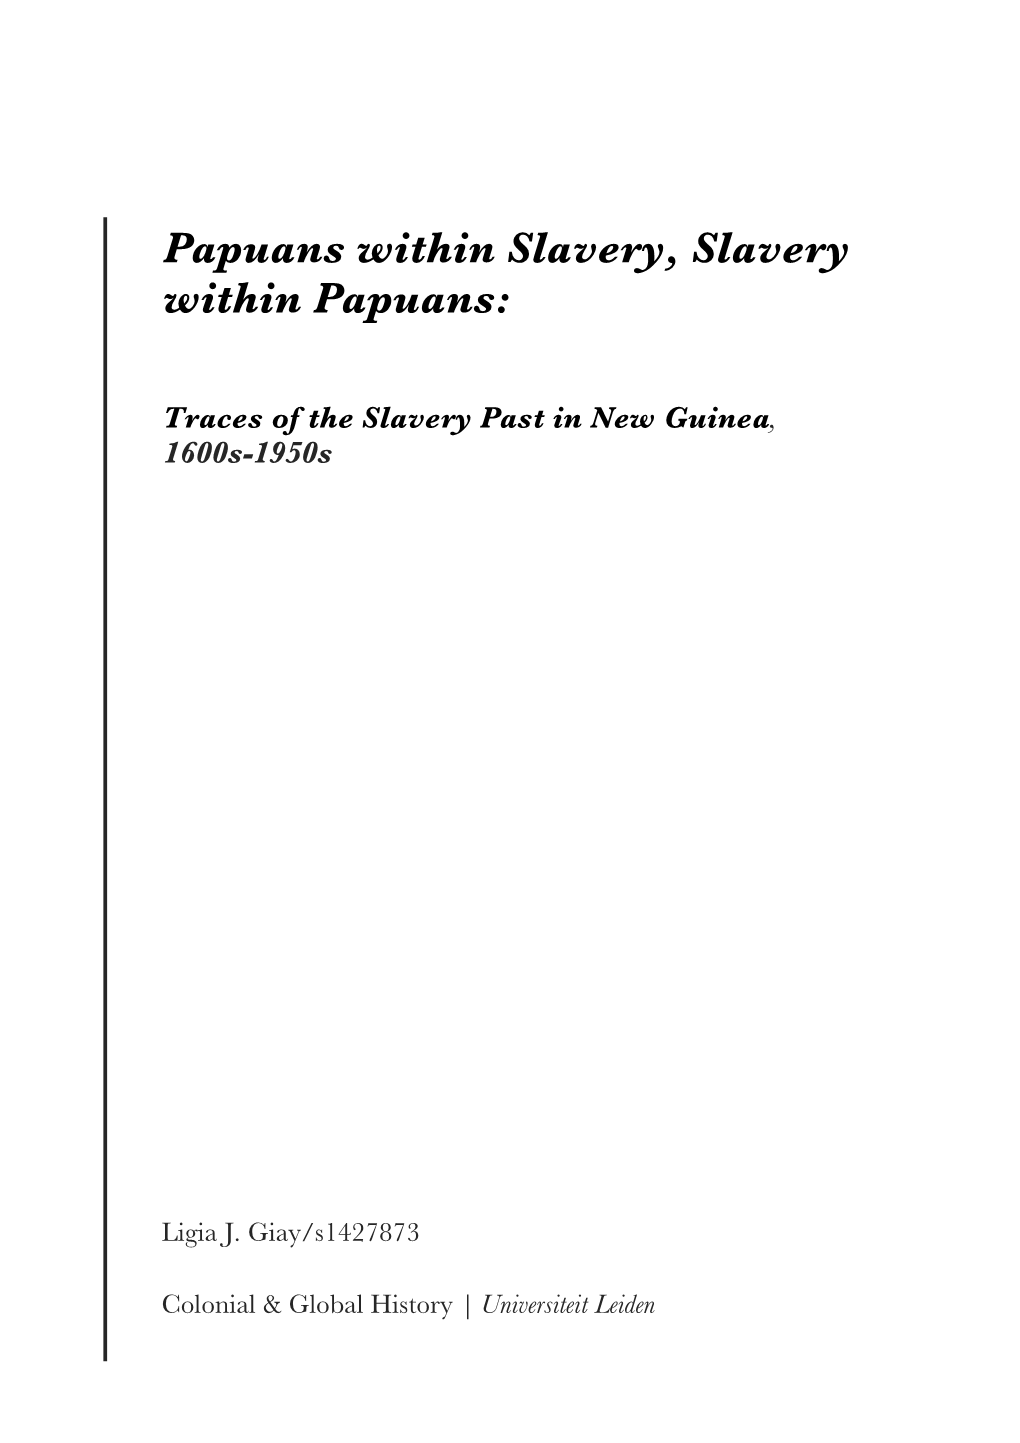 Traces of the Slavery Past in New Guinea, 1600S-1950S